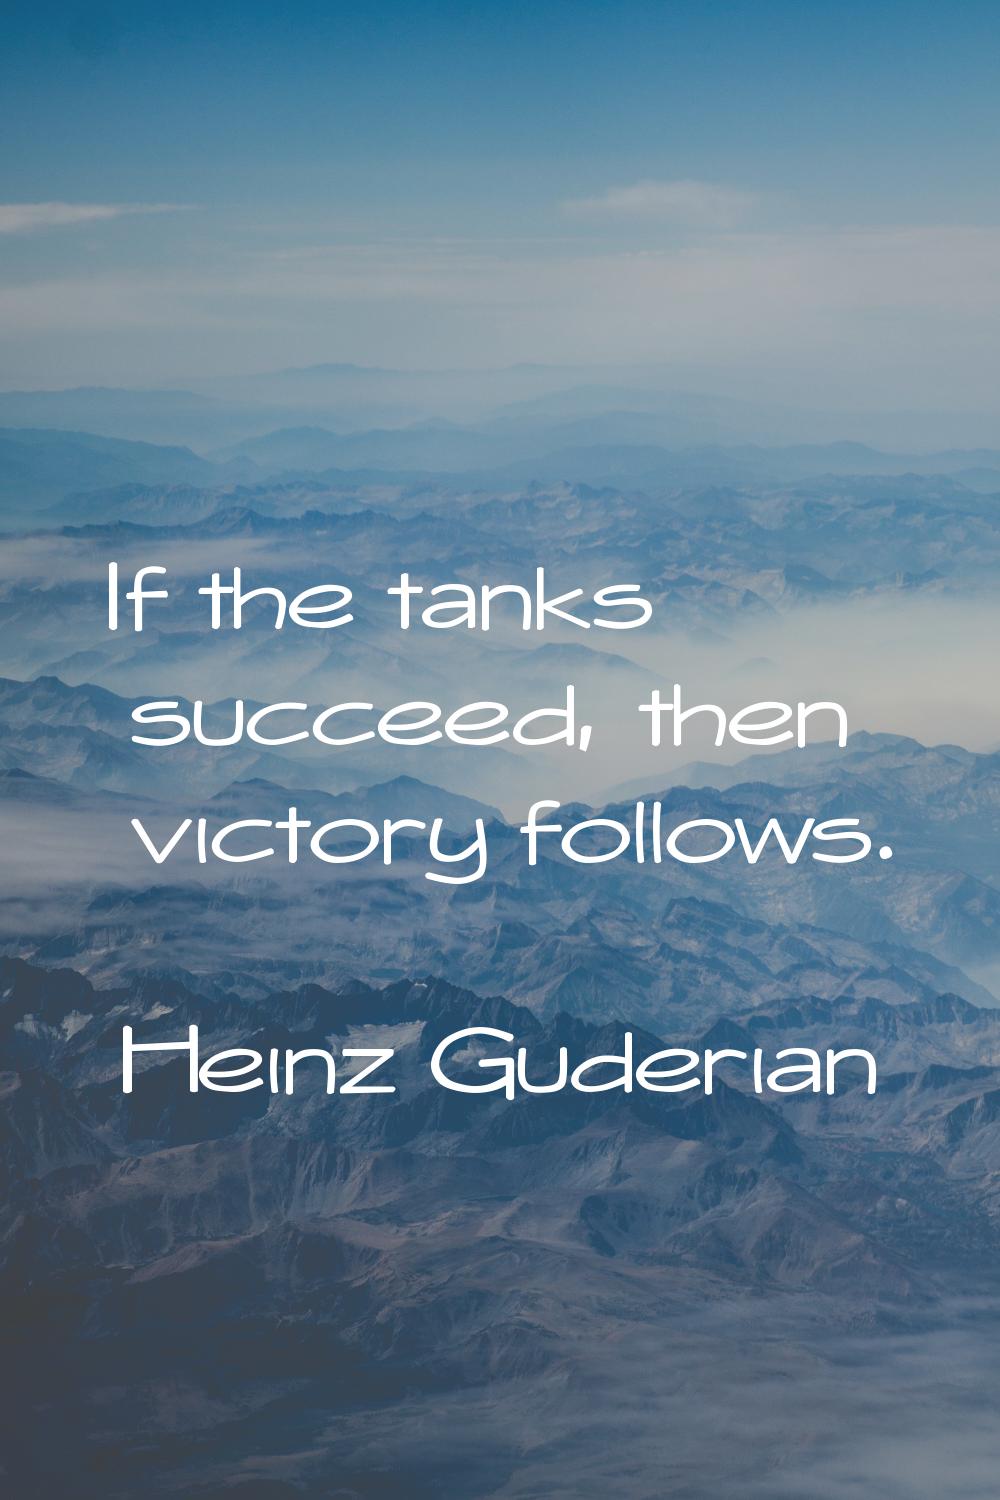 If the tanks succeed, then victory follows.